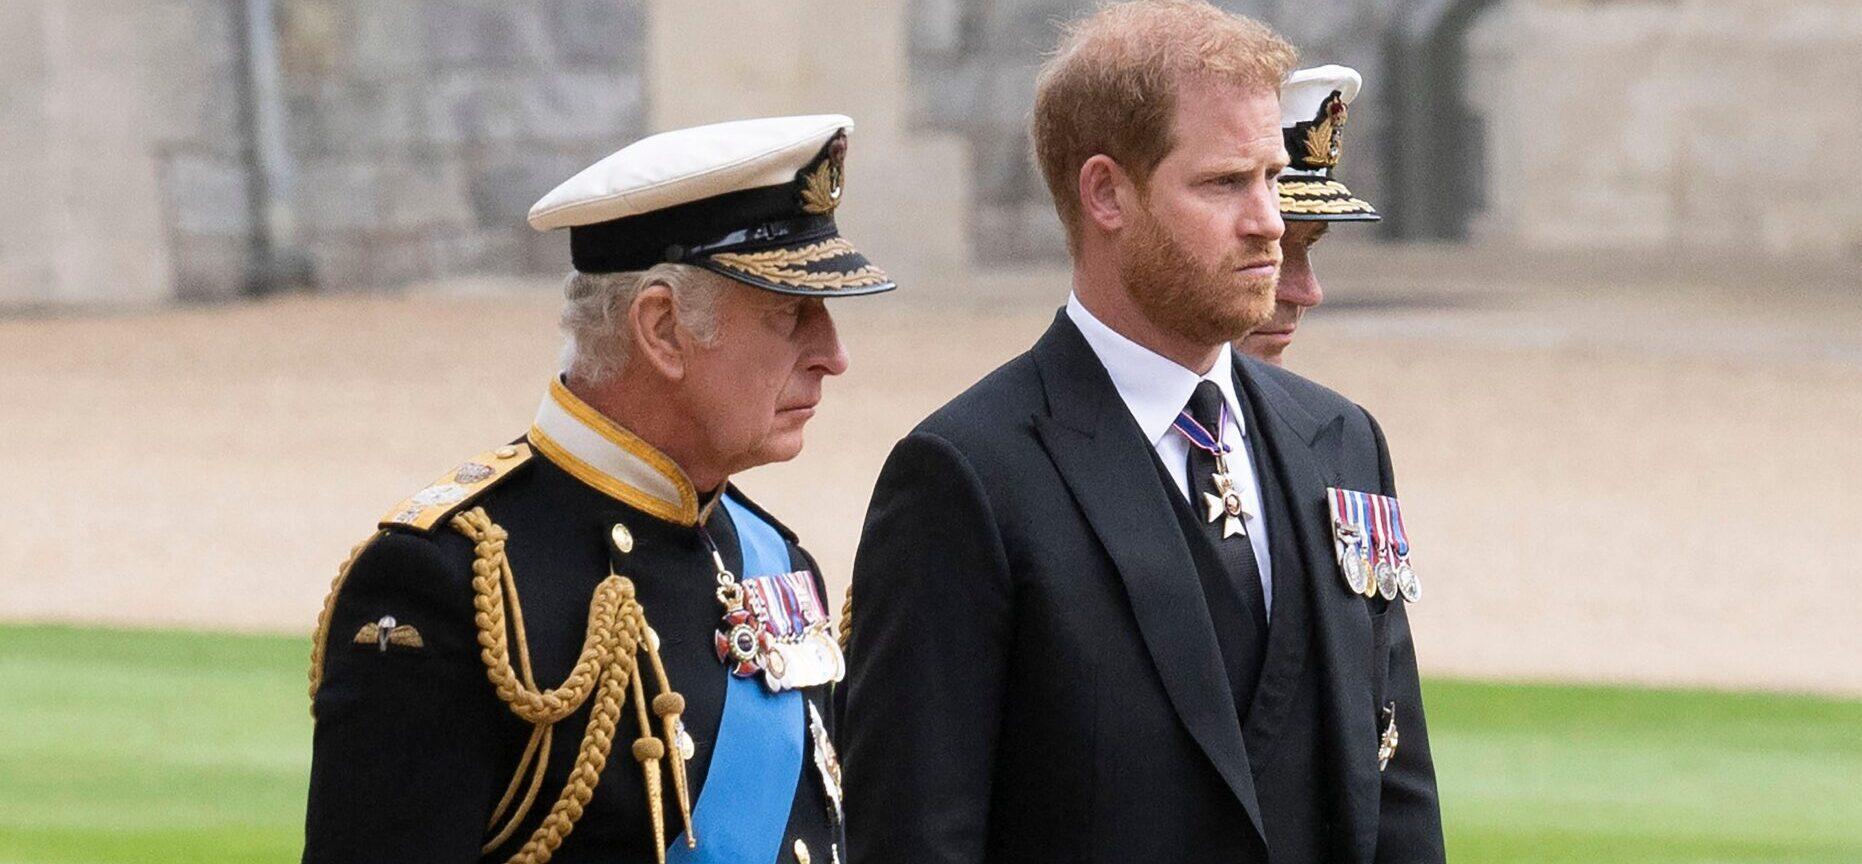 King Charles Reportedly Gives Prince Harry’s Military Role To Prince William